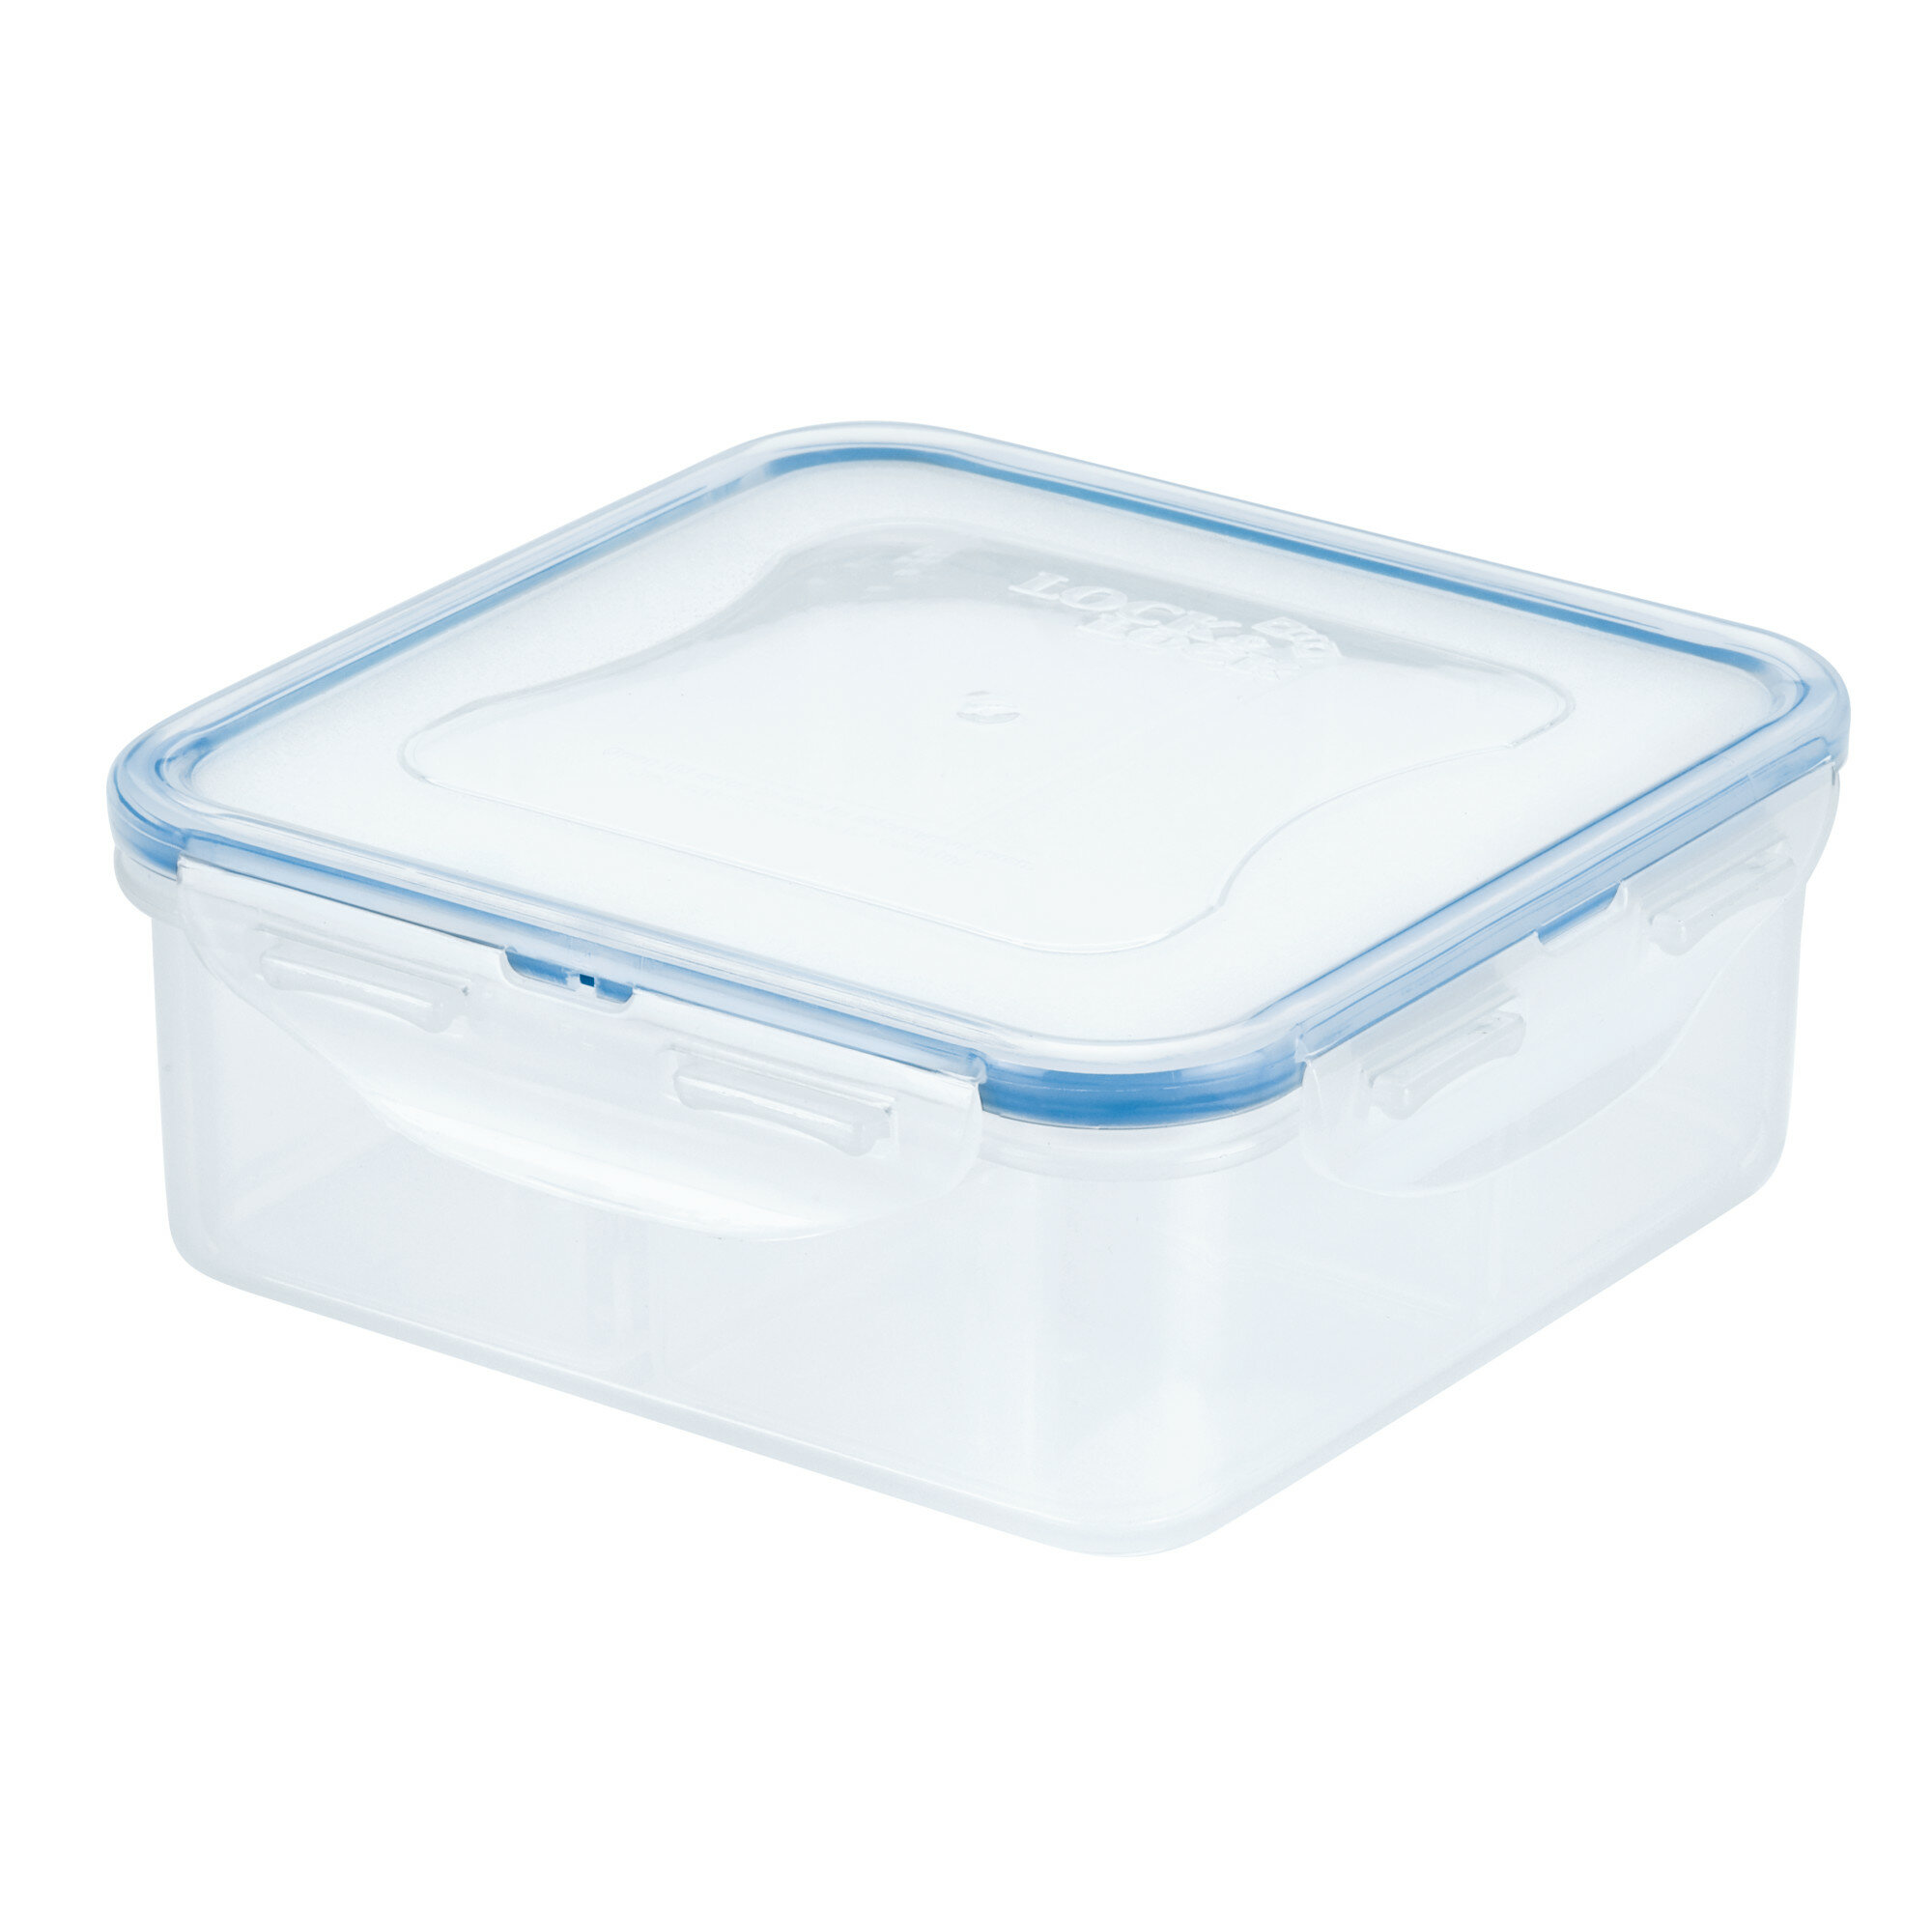 Lock n Lock Purely Better Square 4-Pc. Food Storage Containers with Dividers,  29